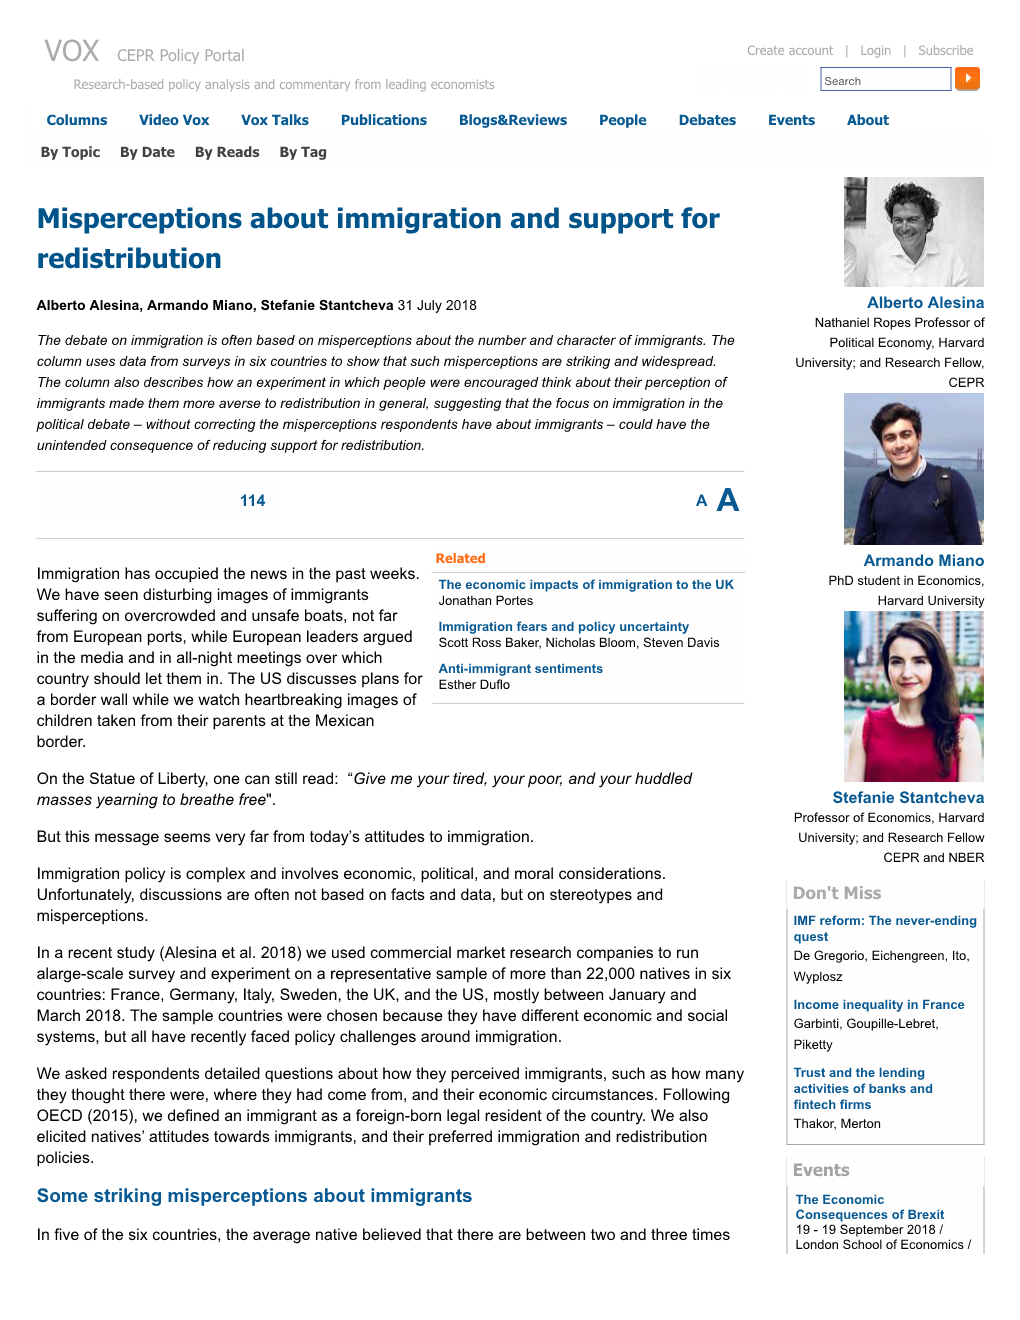 Voxeu Related to Attitudes Towards Immigration, Also Supported More Redistribution